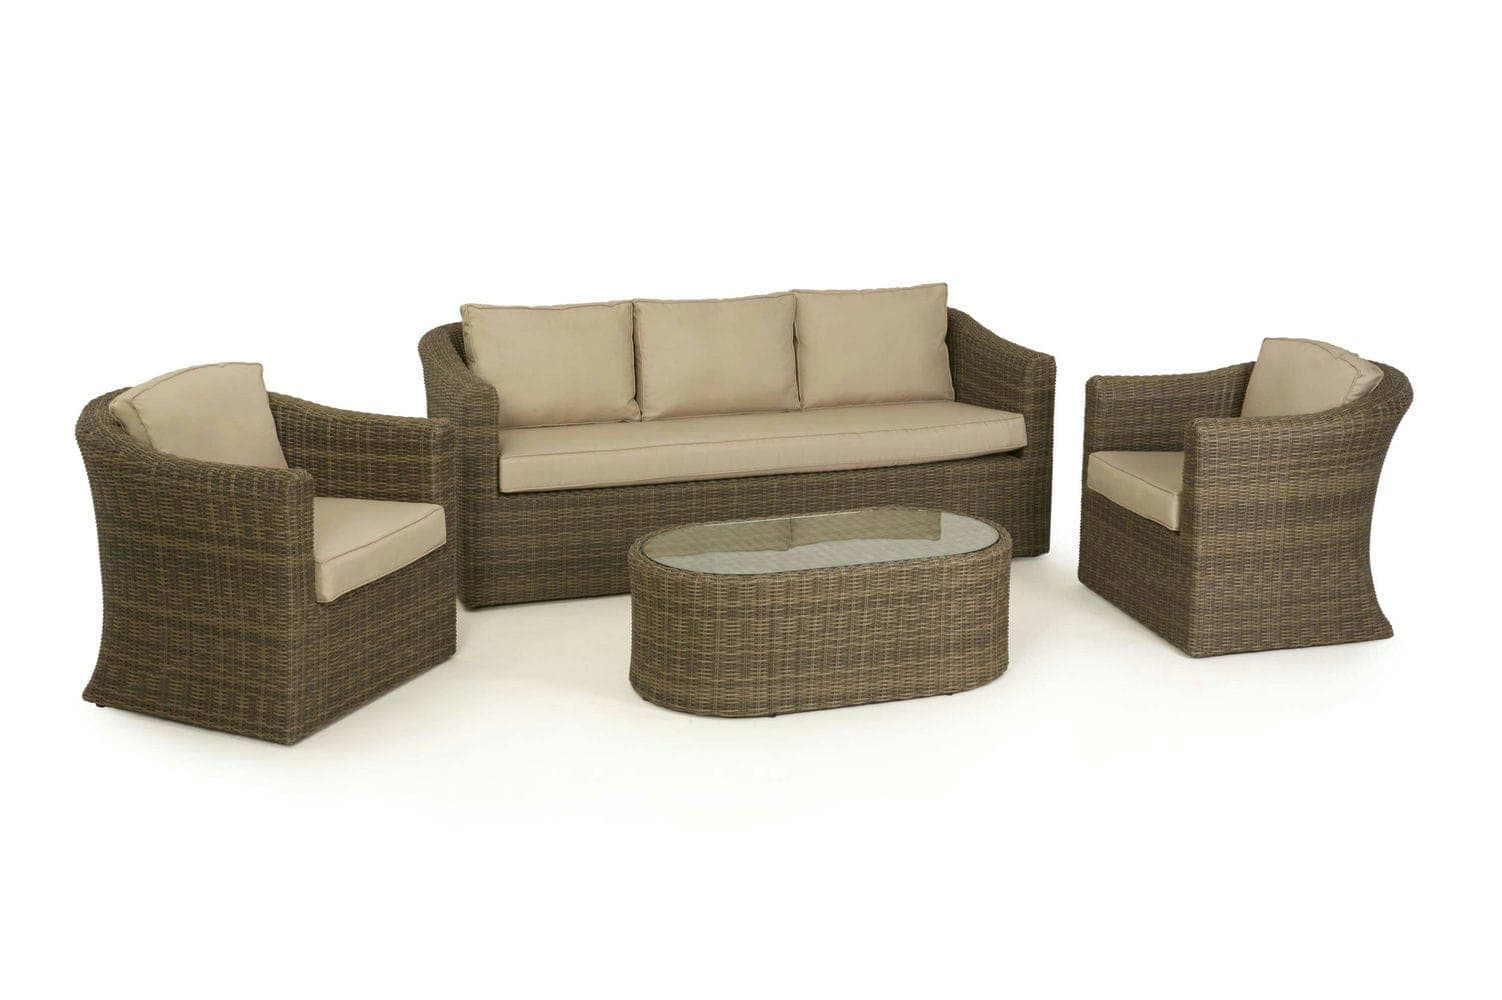 Winchester 3 Seat Sofa Set - Vookoo Lifestyle